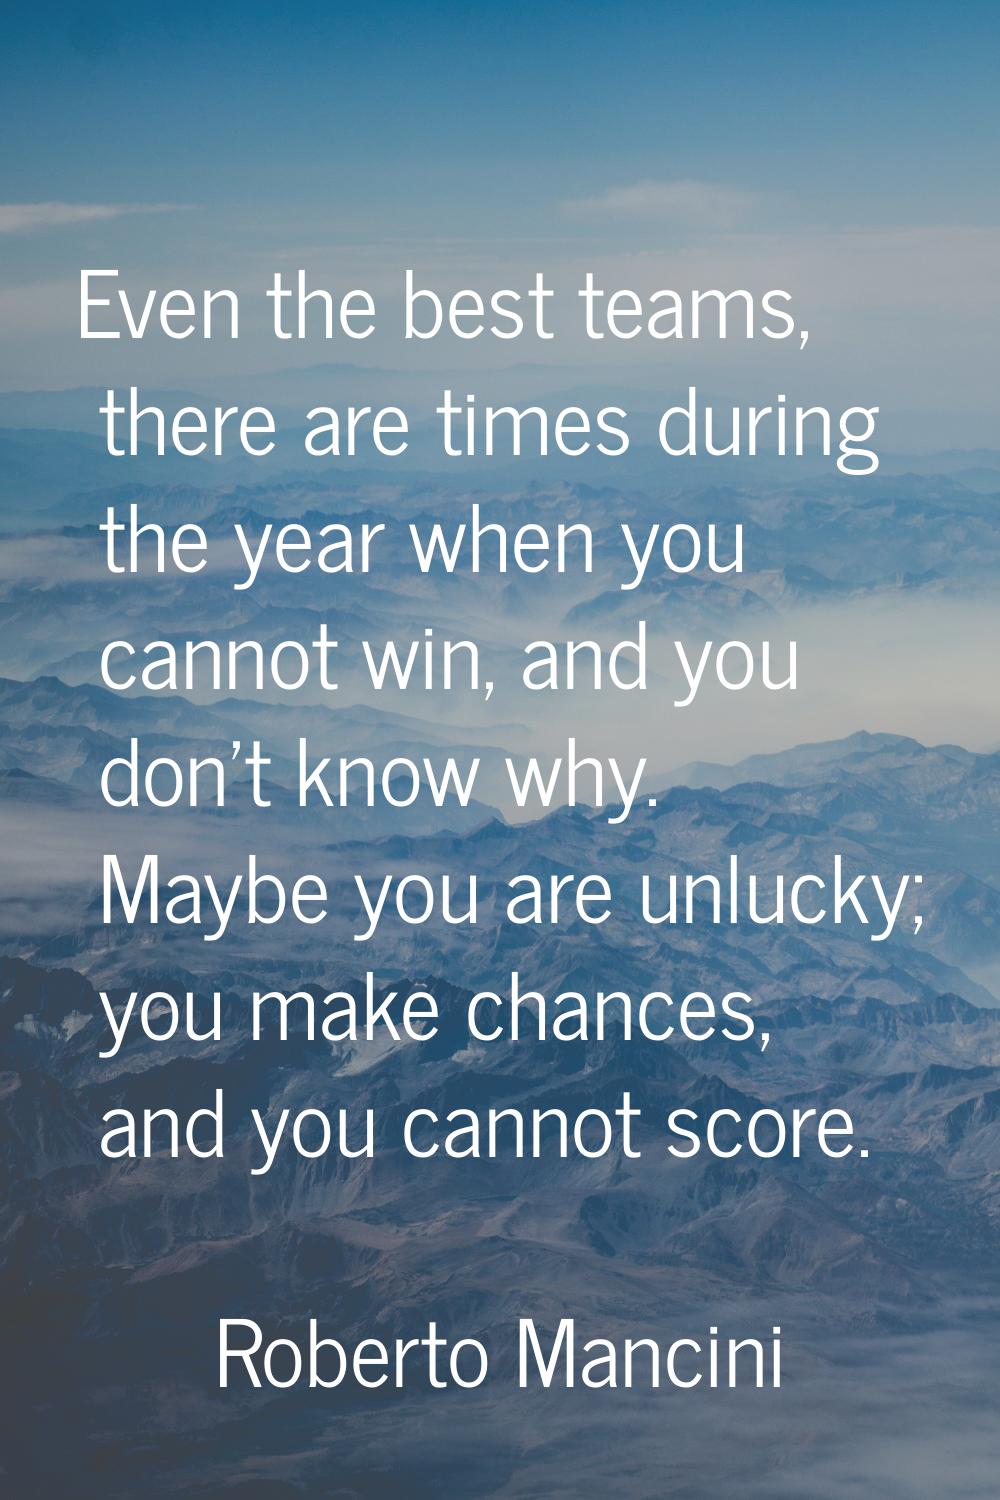 Even the best teams, there are times during the year when you cannot win, and you don't know why. M